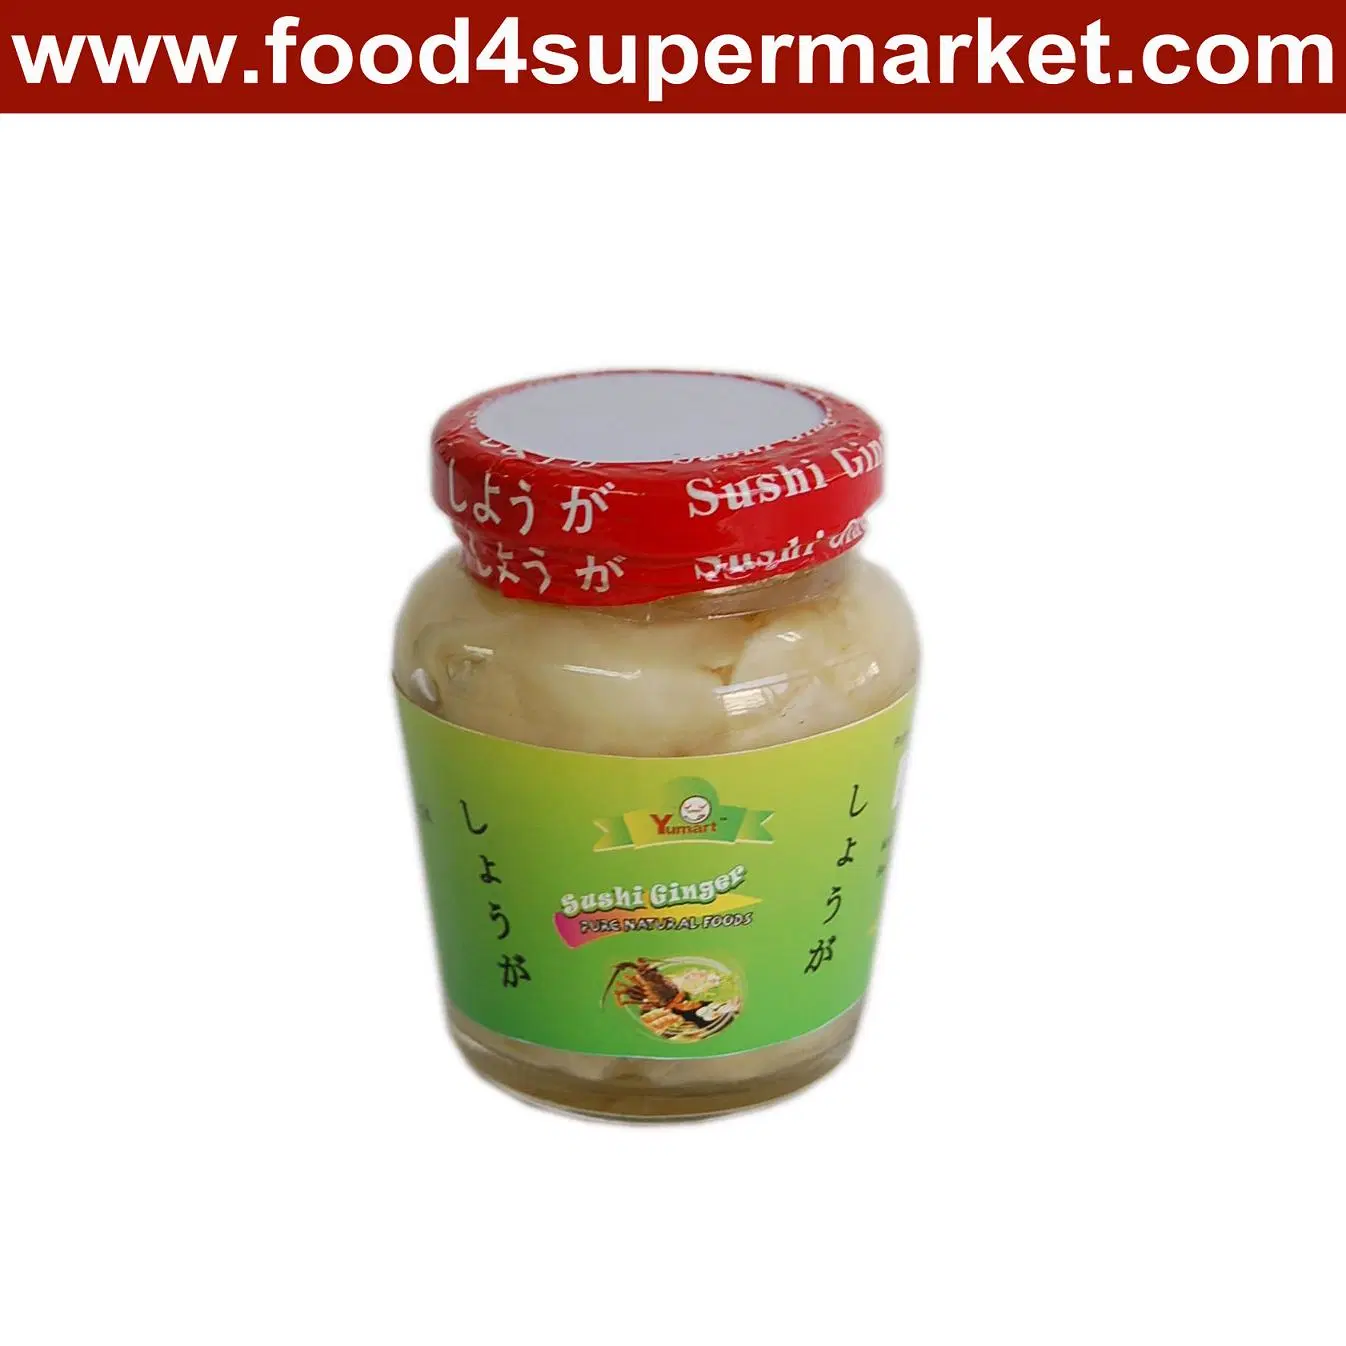 Export of Agriculture Natural Ginger